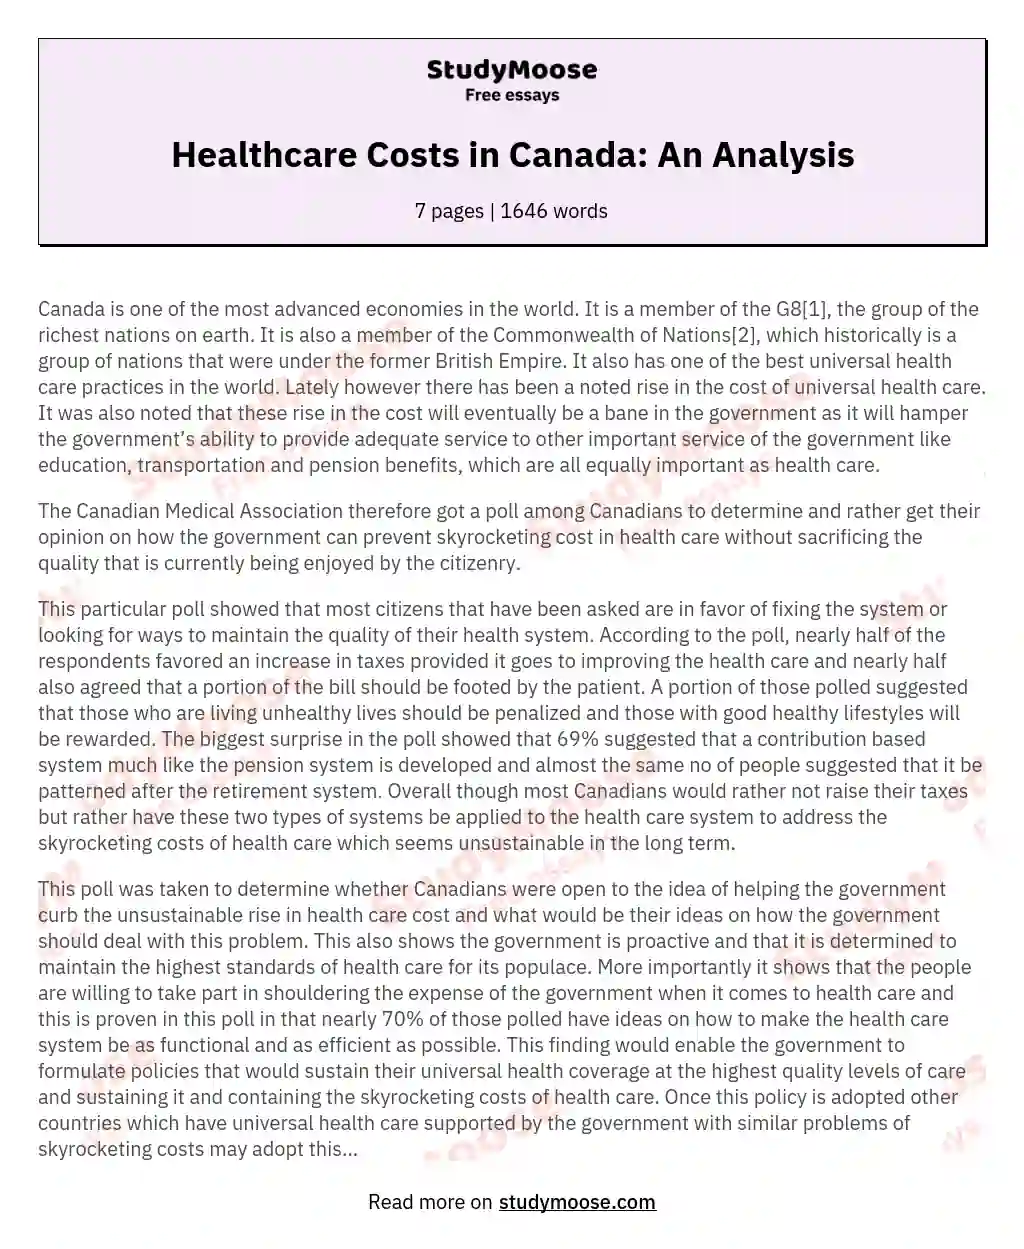 Healthcare Costs in Canada: An Analysis essay